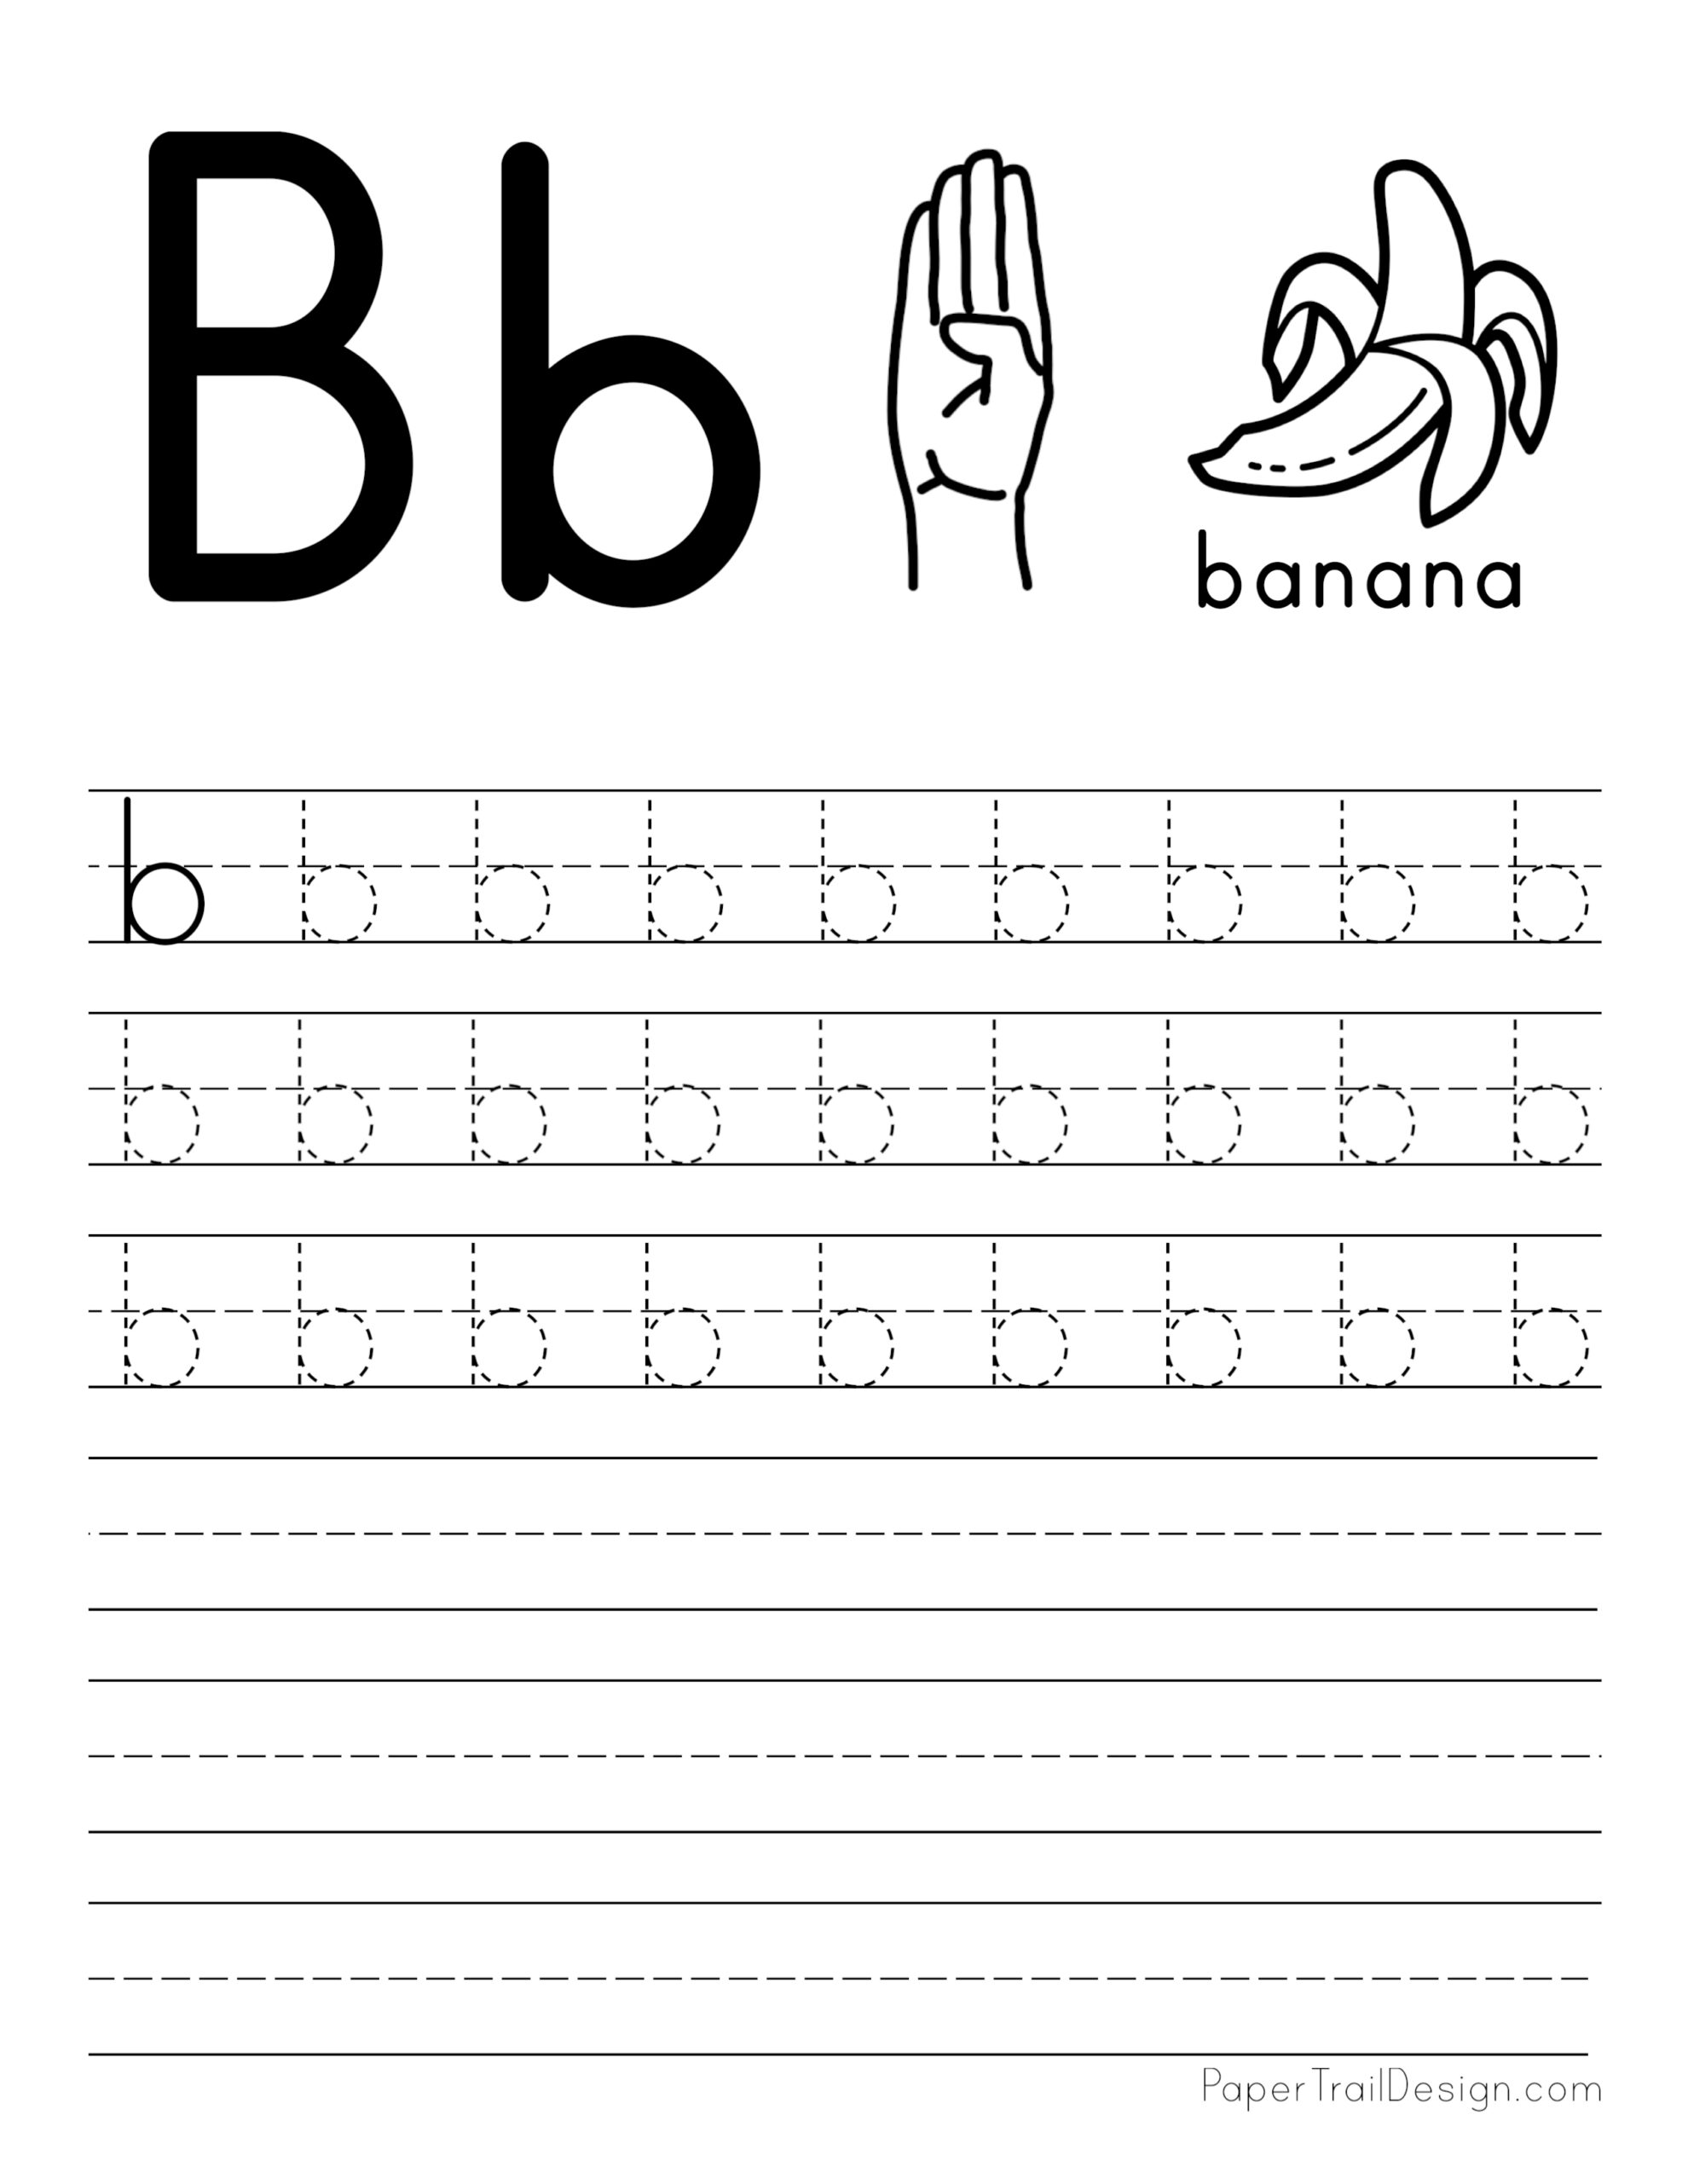 Lowercase Letter E Tracing Worksheets Leticia Camargo